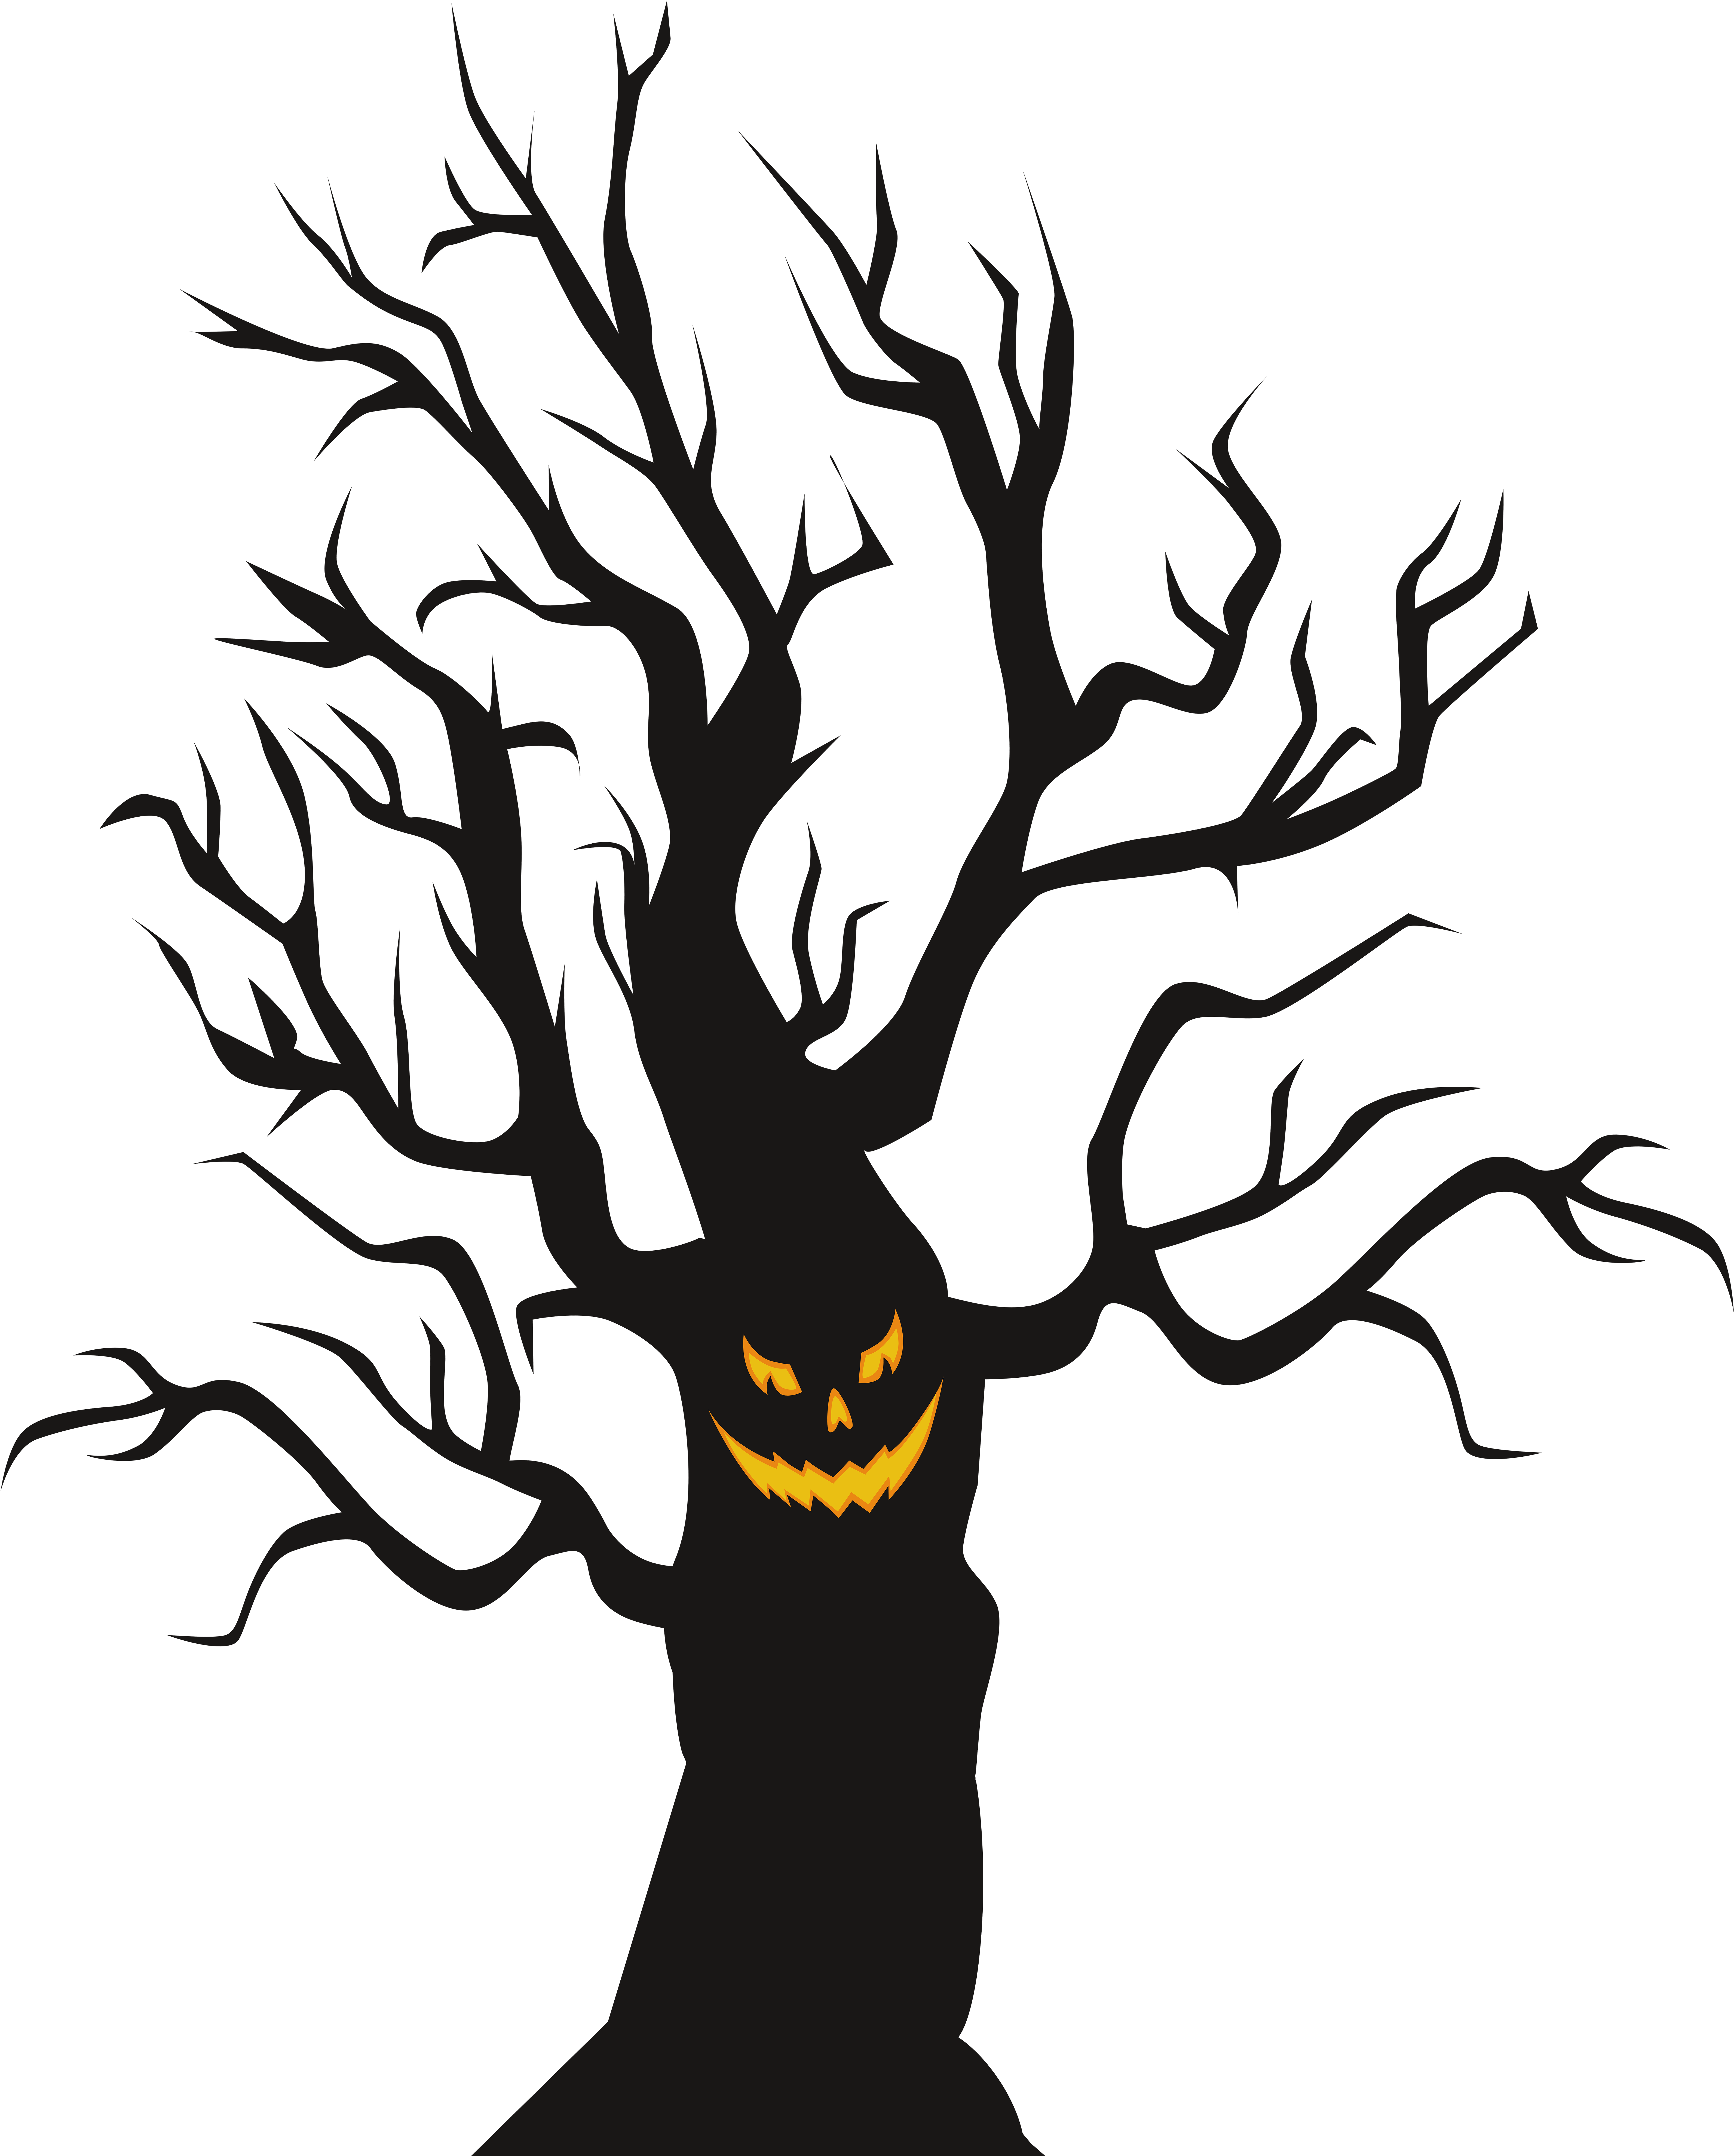 Halloween Scary Tree Png Clip Art Image - Halloween Scary Tree Png Clip Art Image (6548x8000)